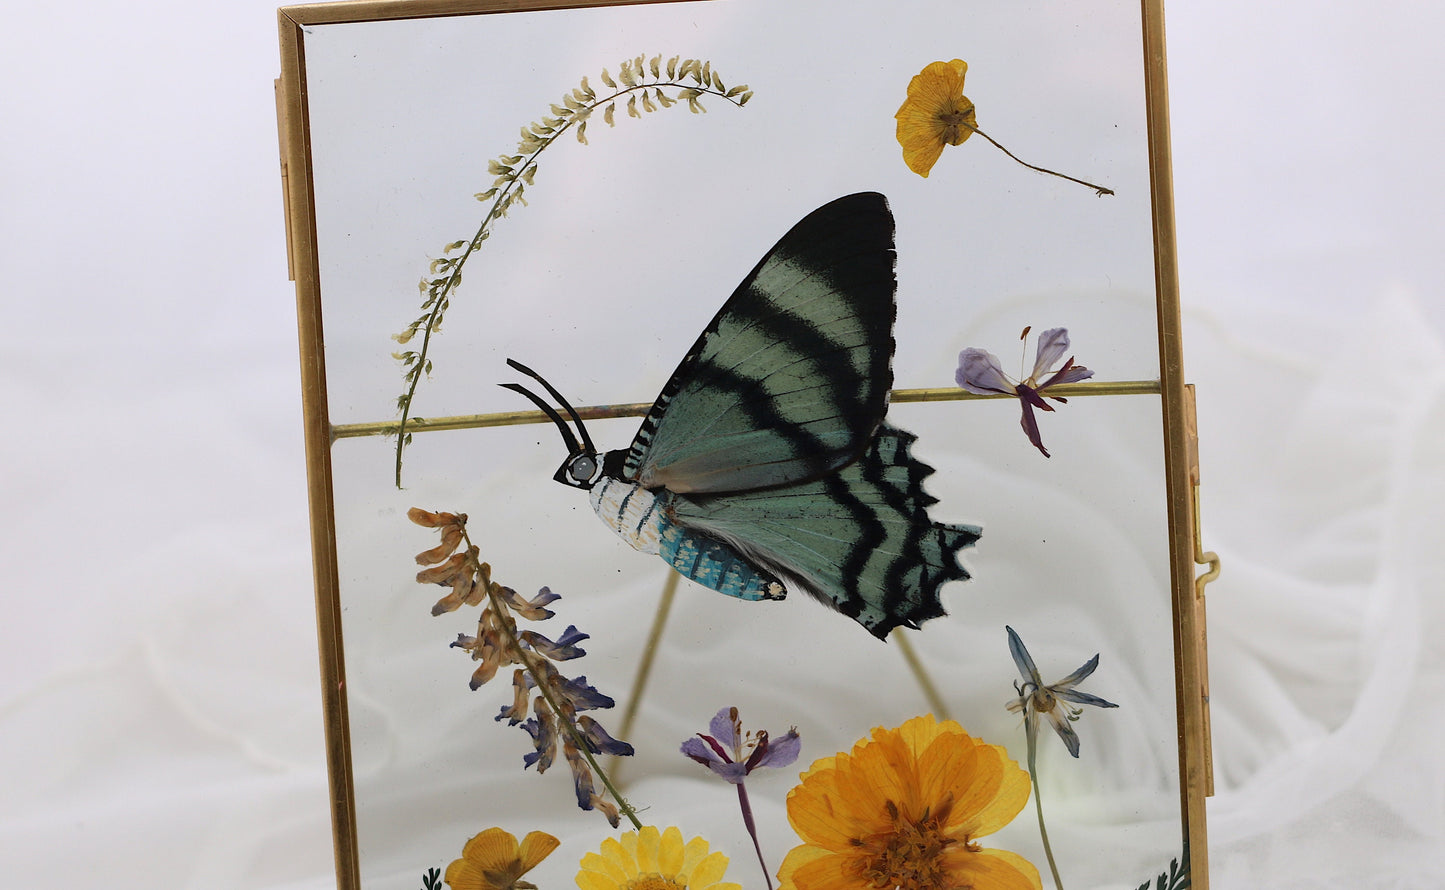 Framed Butterfly Art | Cottagecore & Goblincore Witch Home Decor | Real Insect Bug Taxidermy, Entomology | Oddities and Curiosities Wall Art